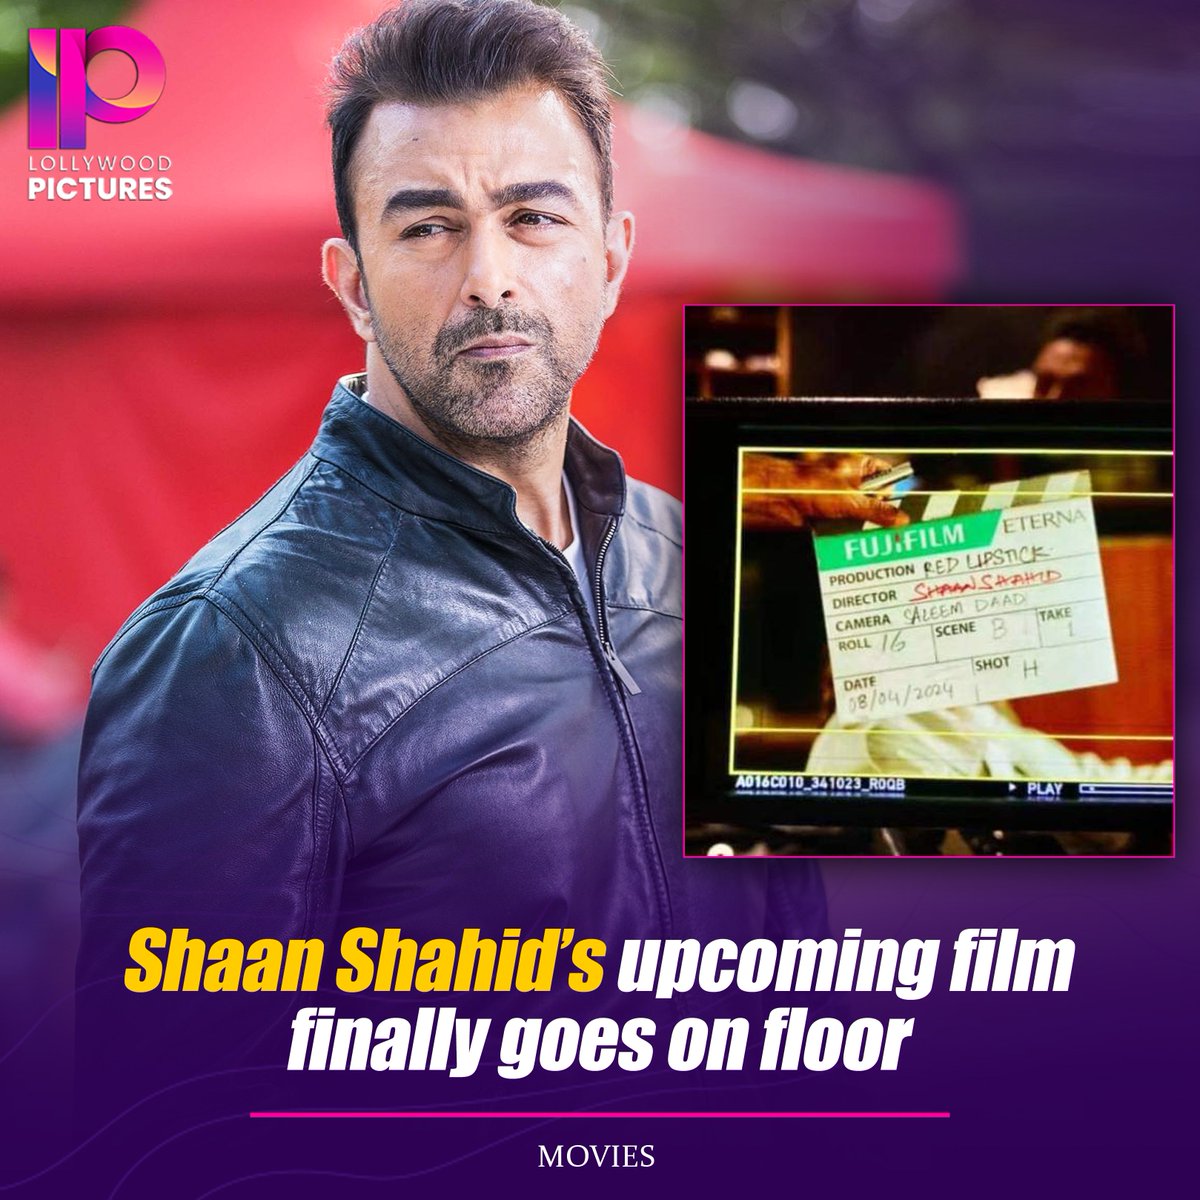 #Exclusive #ShaanShahid is coming back on the big screen with a bang! 🔥 Started shooting for his next movie, and one of the top actresses is joining him as the female lead. Stay tuned for the details. #LollywoodPictures #PakistaniCinema